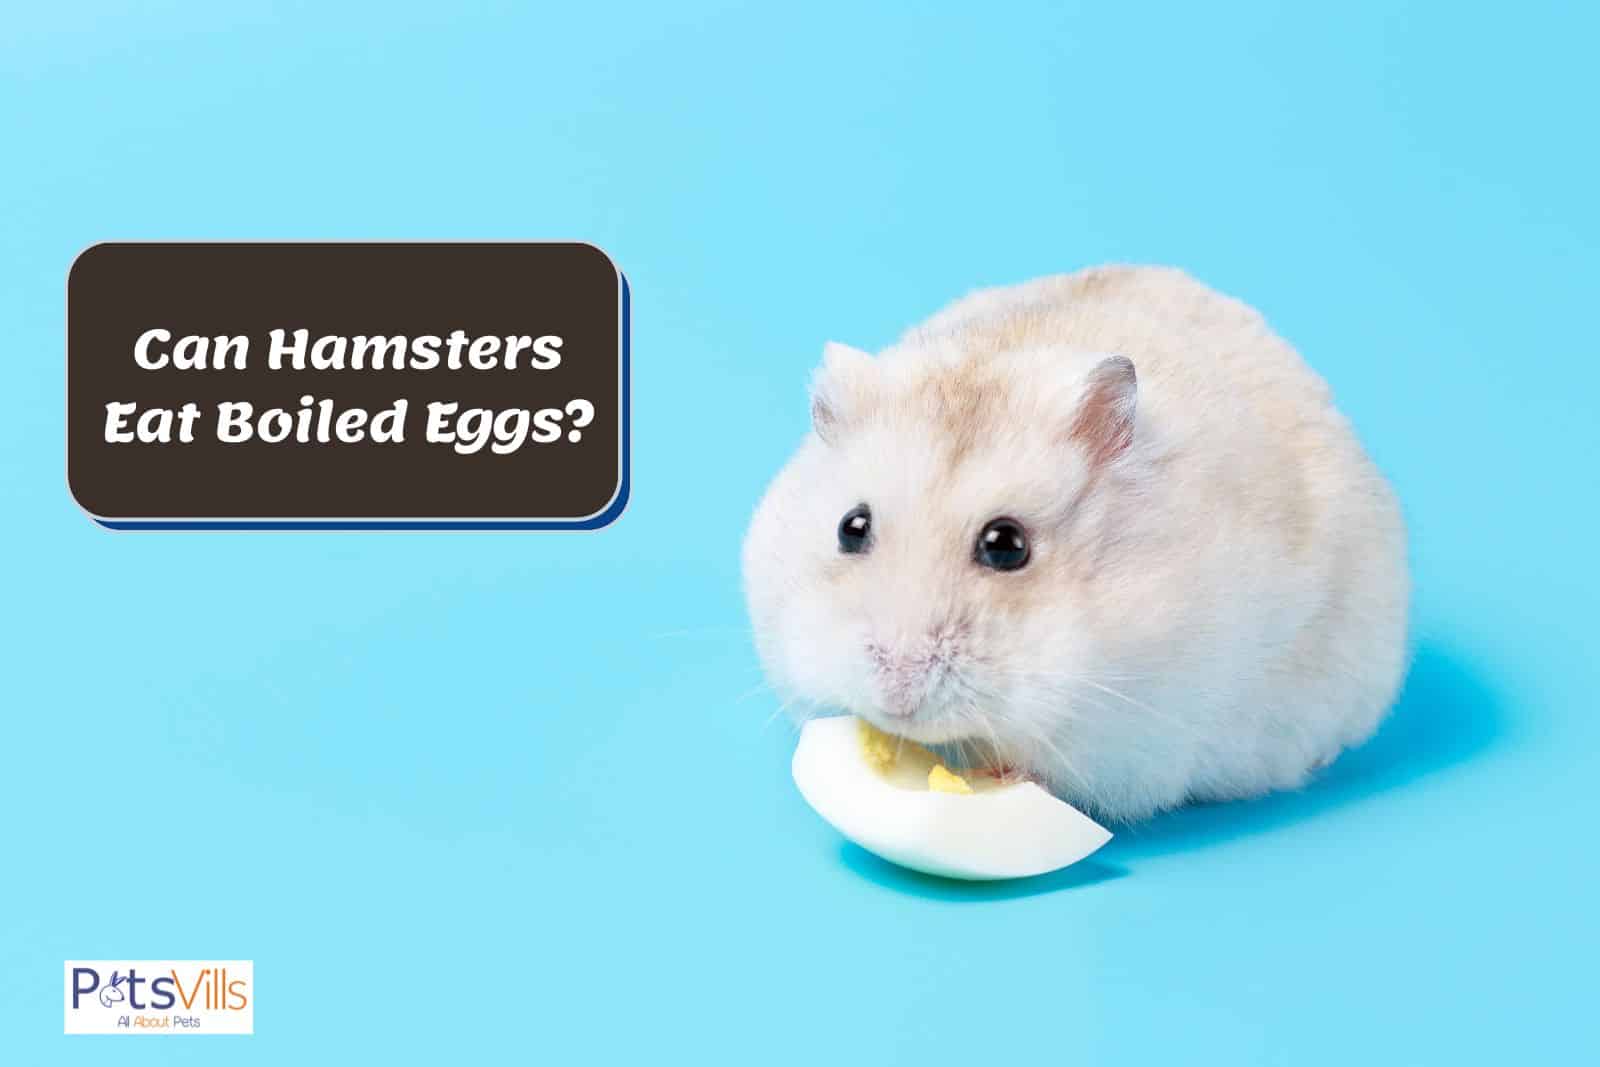 a hamster trying to eat egg, can hamsters eat boiled eggs